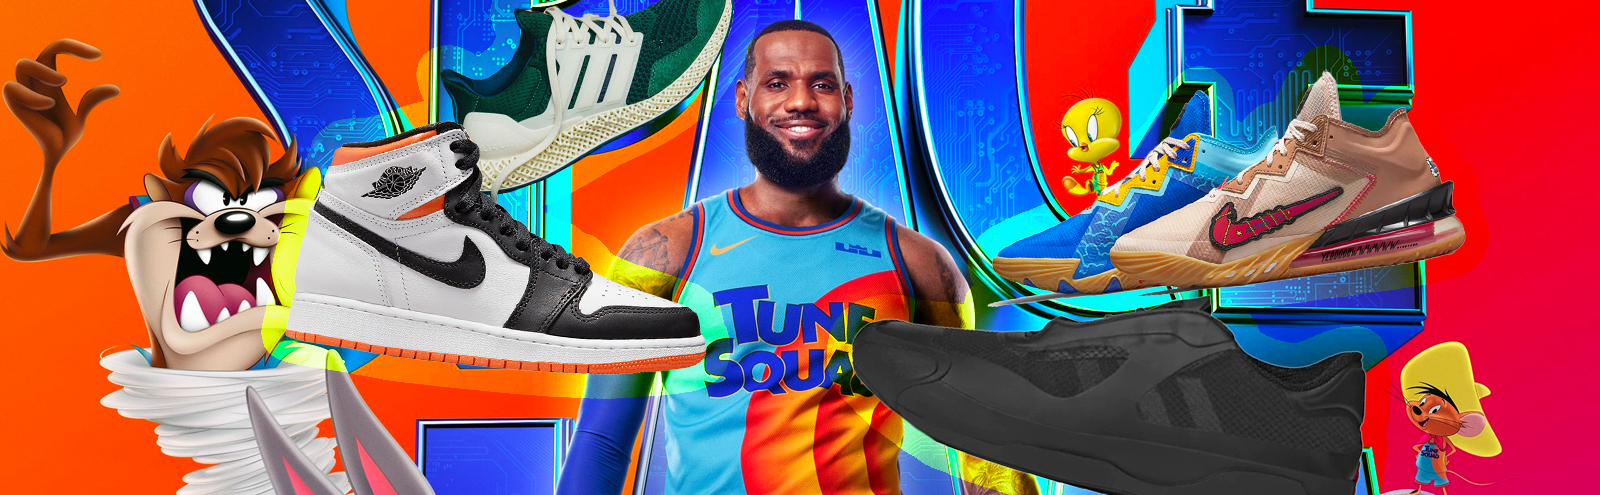 Best 'Space Jam: A New Legacy' Merch to Buy: Nike Shoes, Jerseys, and More